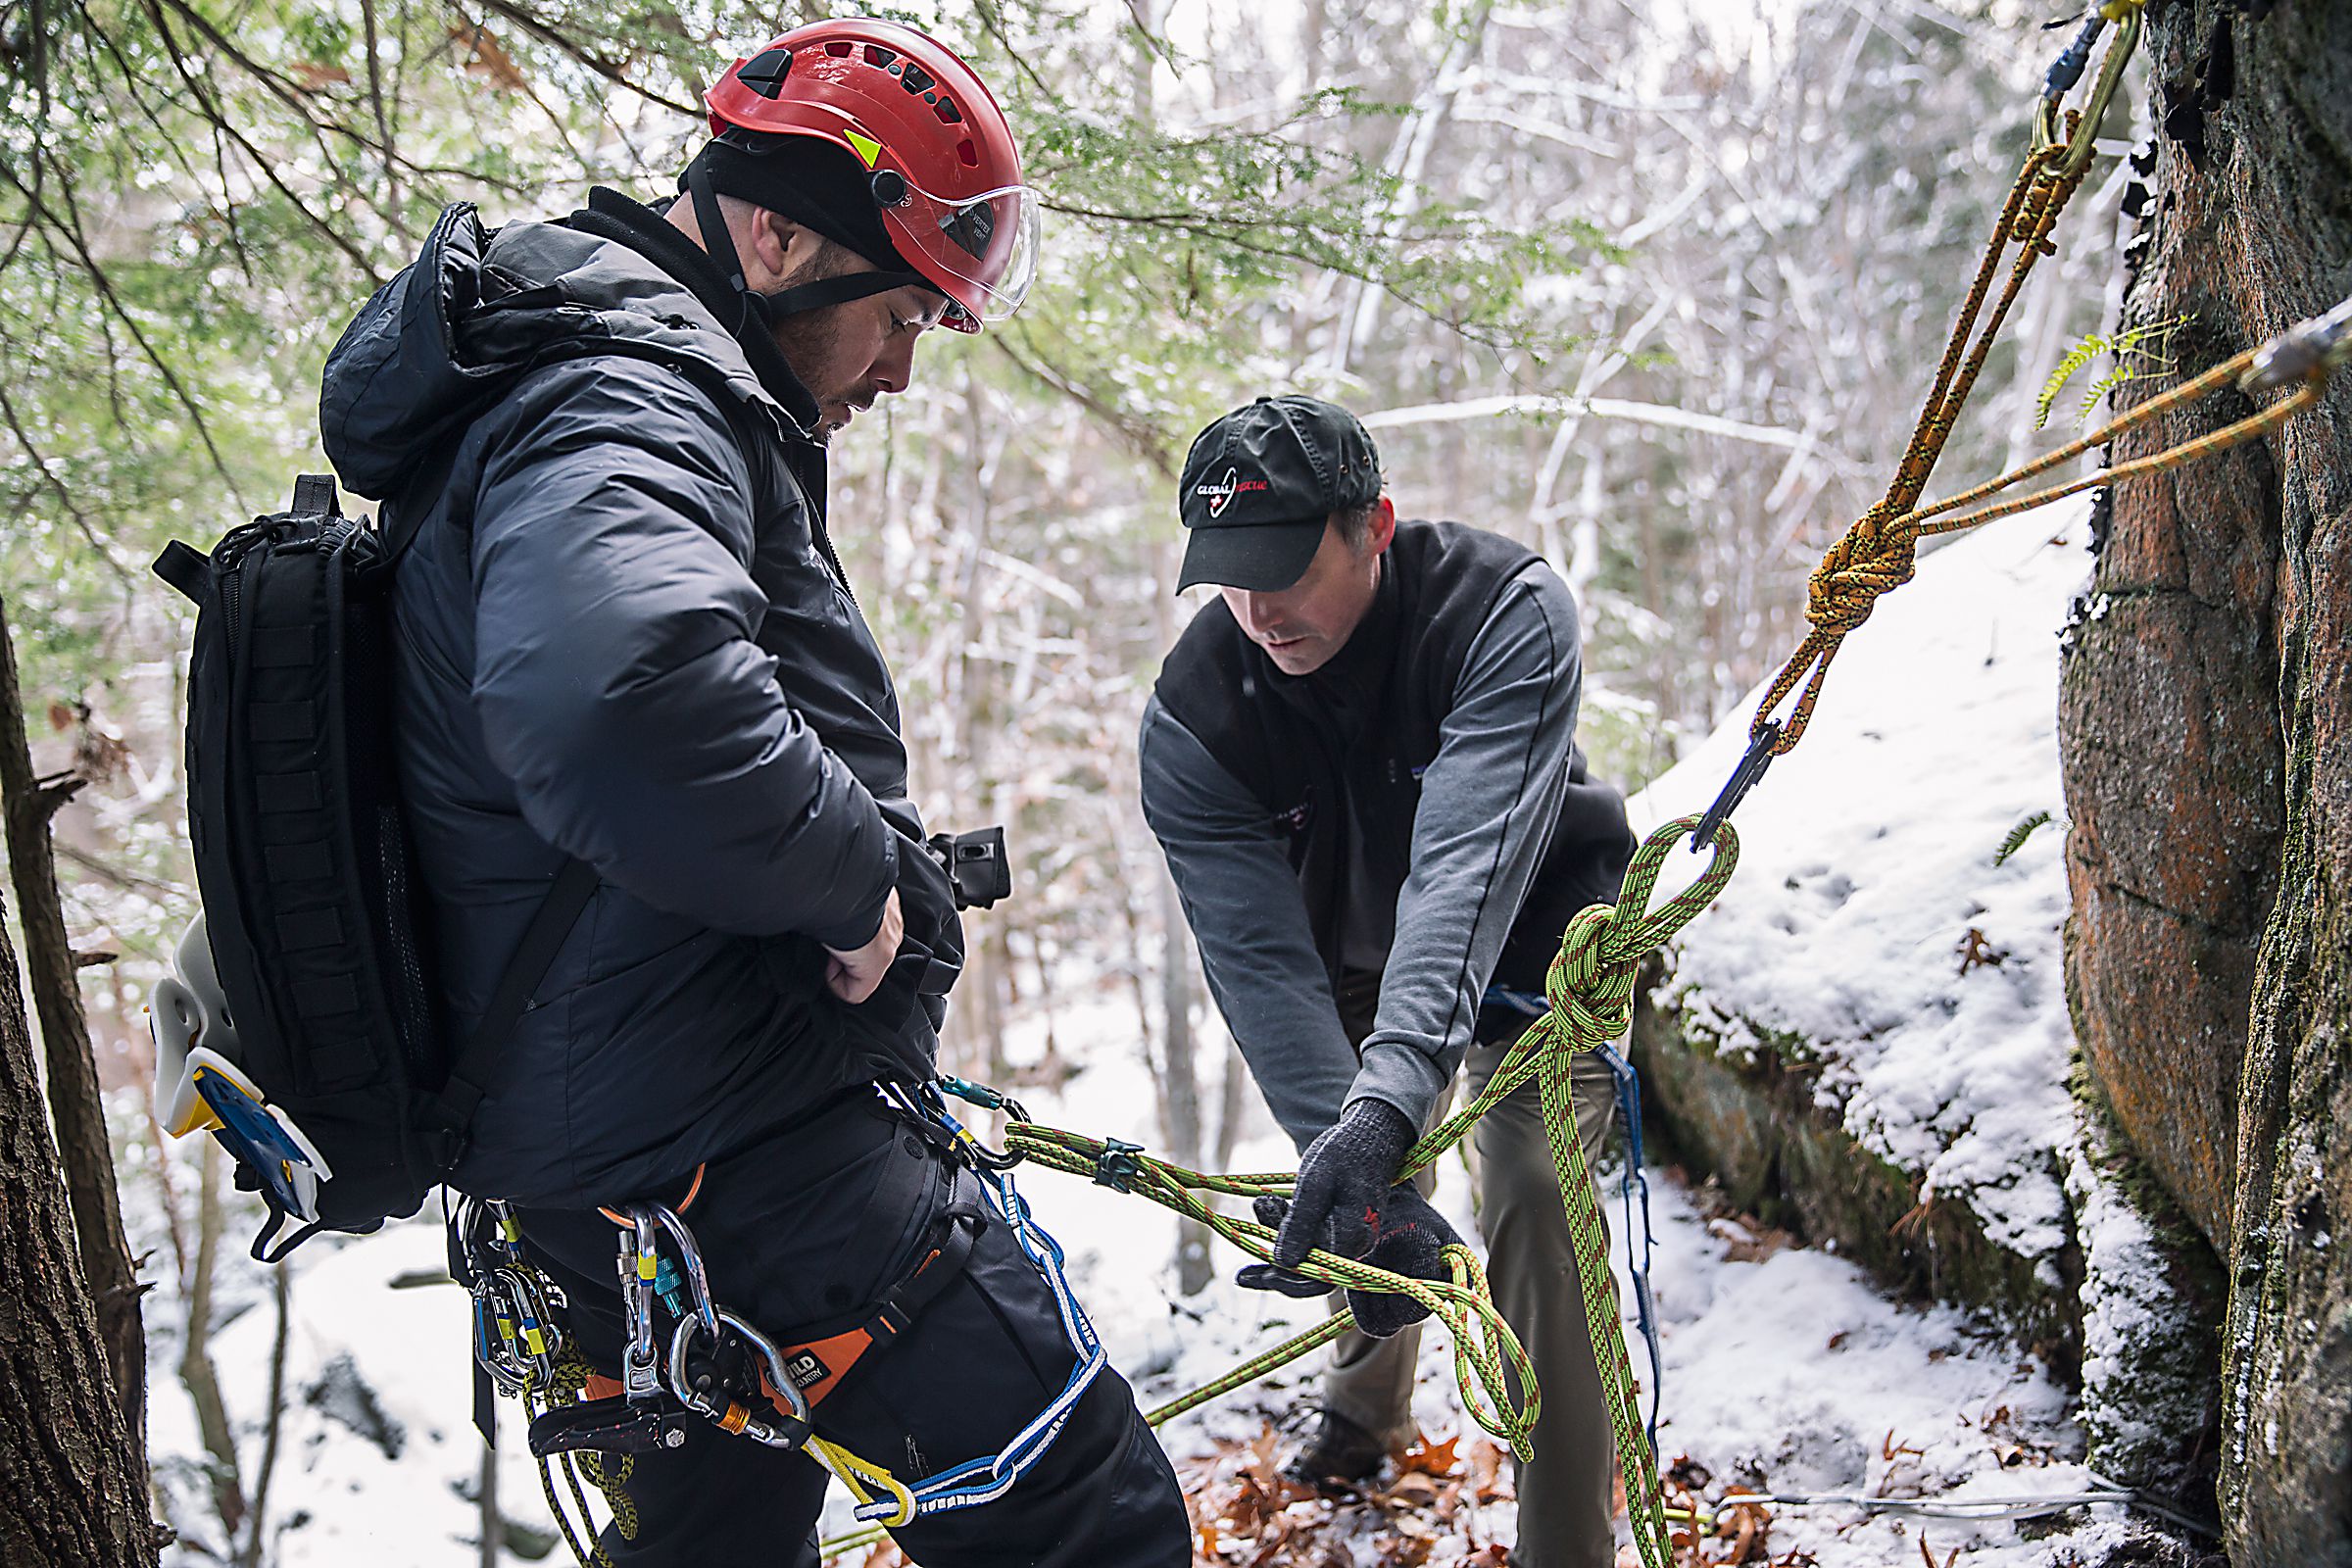 Drew Pache, left, of Norwich, Vt., Senior Manager for Security Operations at Global Rescue, helps to secure Dave Keaveny, a medical specialist and an advanced EMT, during a training exercise in Lebanon, N.H., on Friday, December 9, 2016. The training exercise was to simulate the treatment and evacuation of a wounded climber from a remote location. (Valley News - John Happel) Copyright Valley News. May not be reprinted or used online without permission. Send requests to permission@vnews.com.